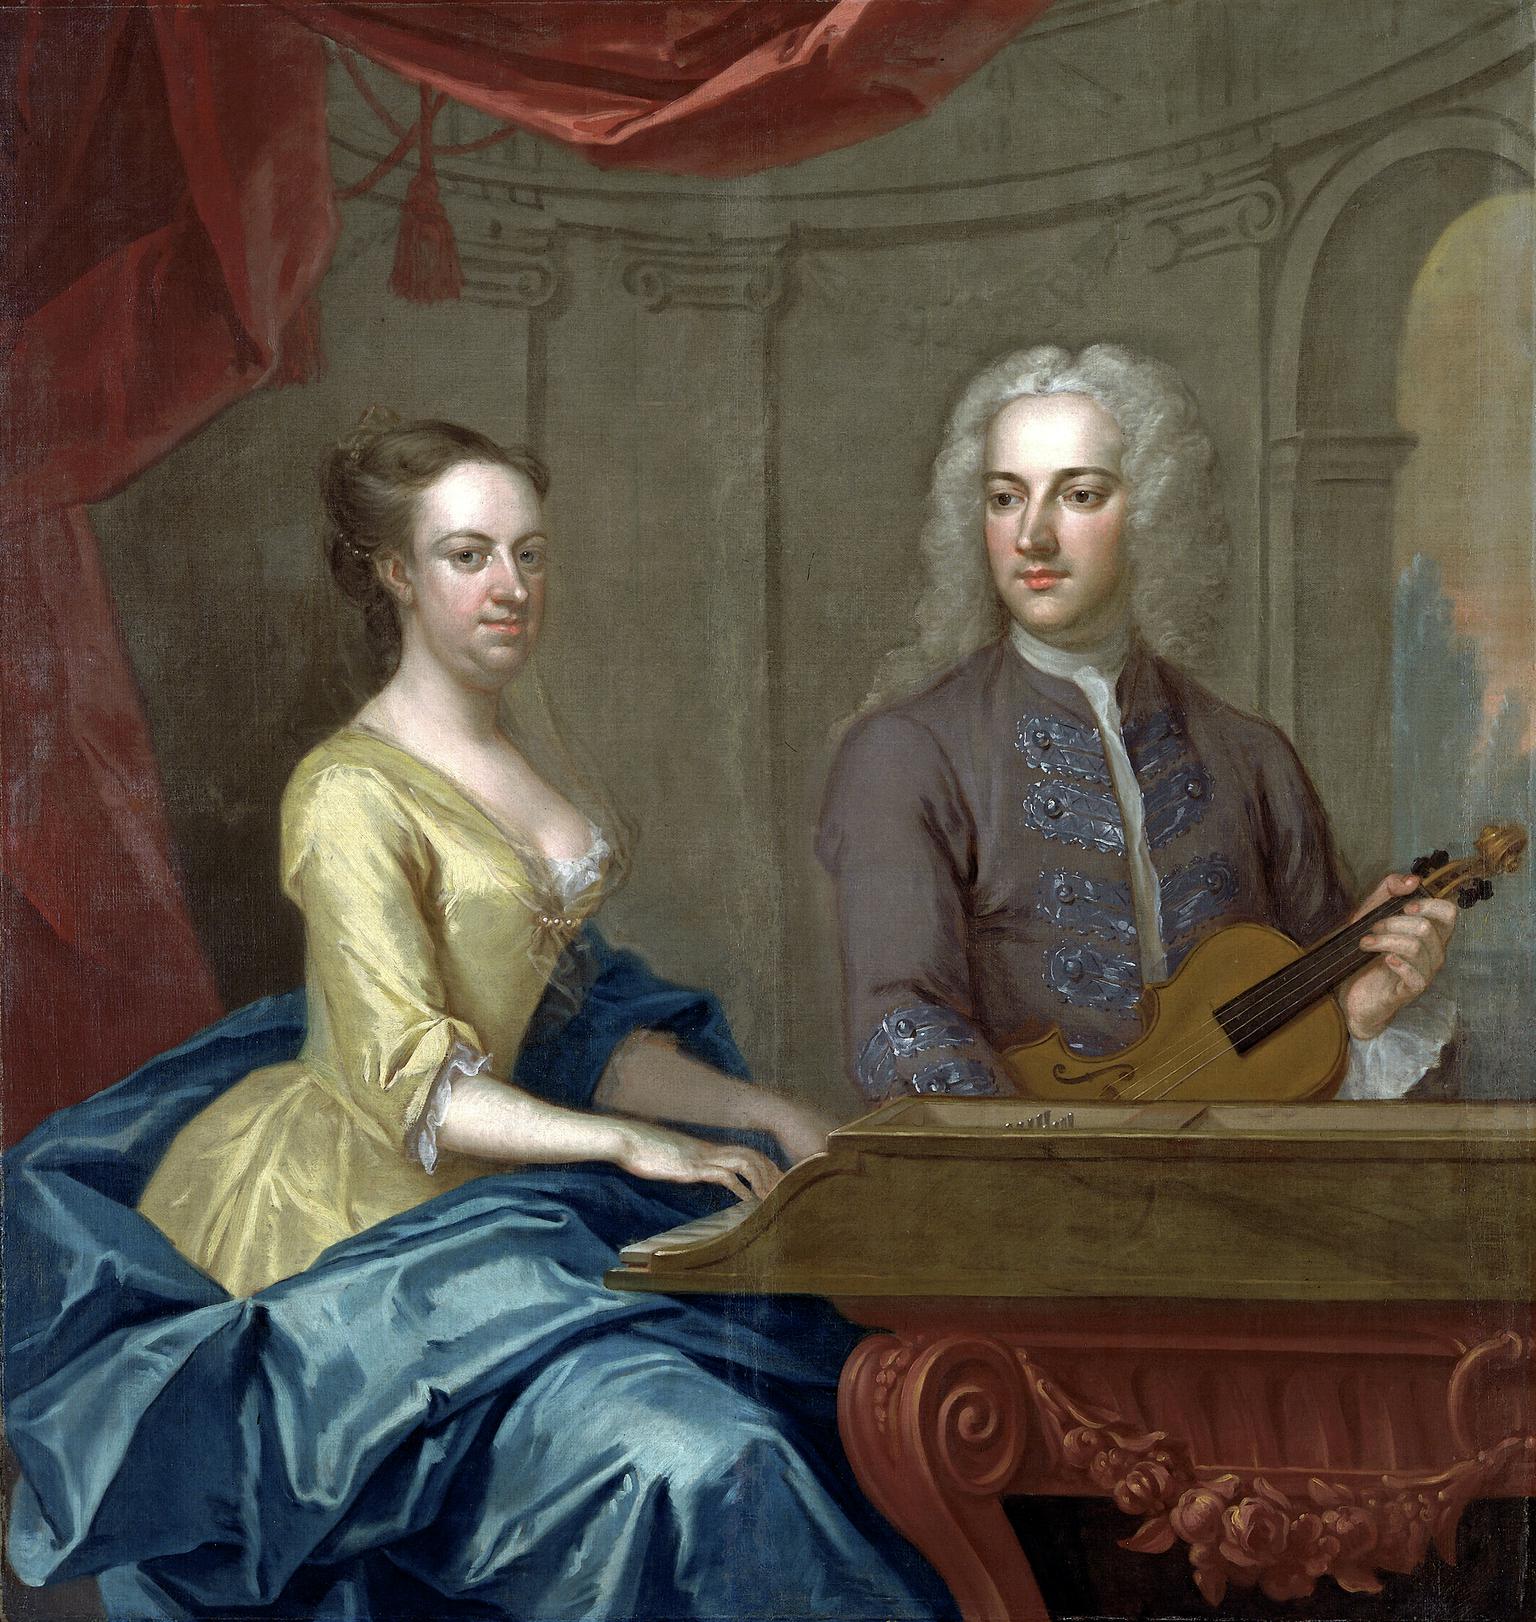 Thomas Powell (c.1701-1752) and his wife Mary